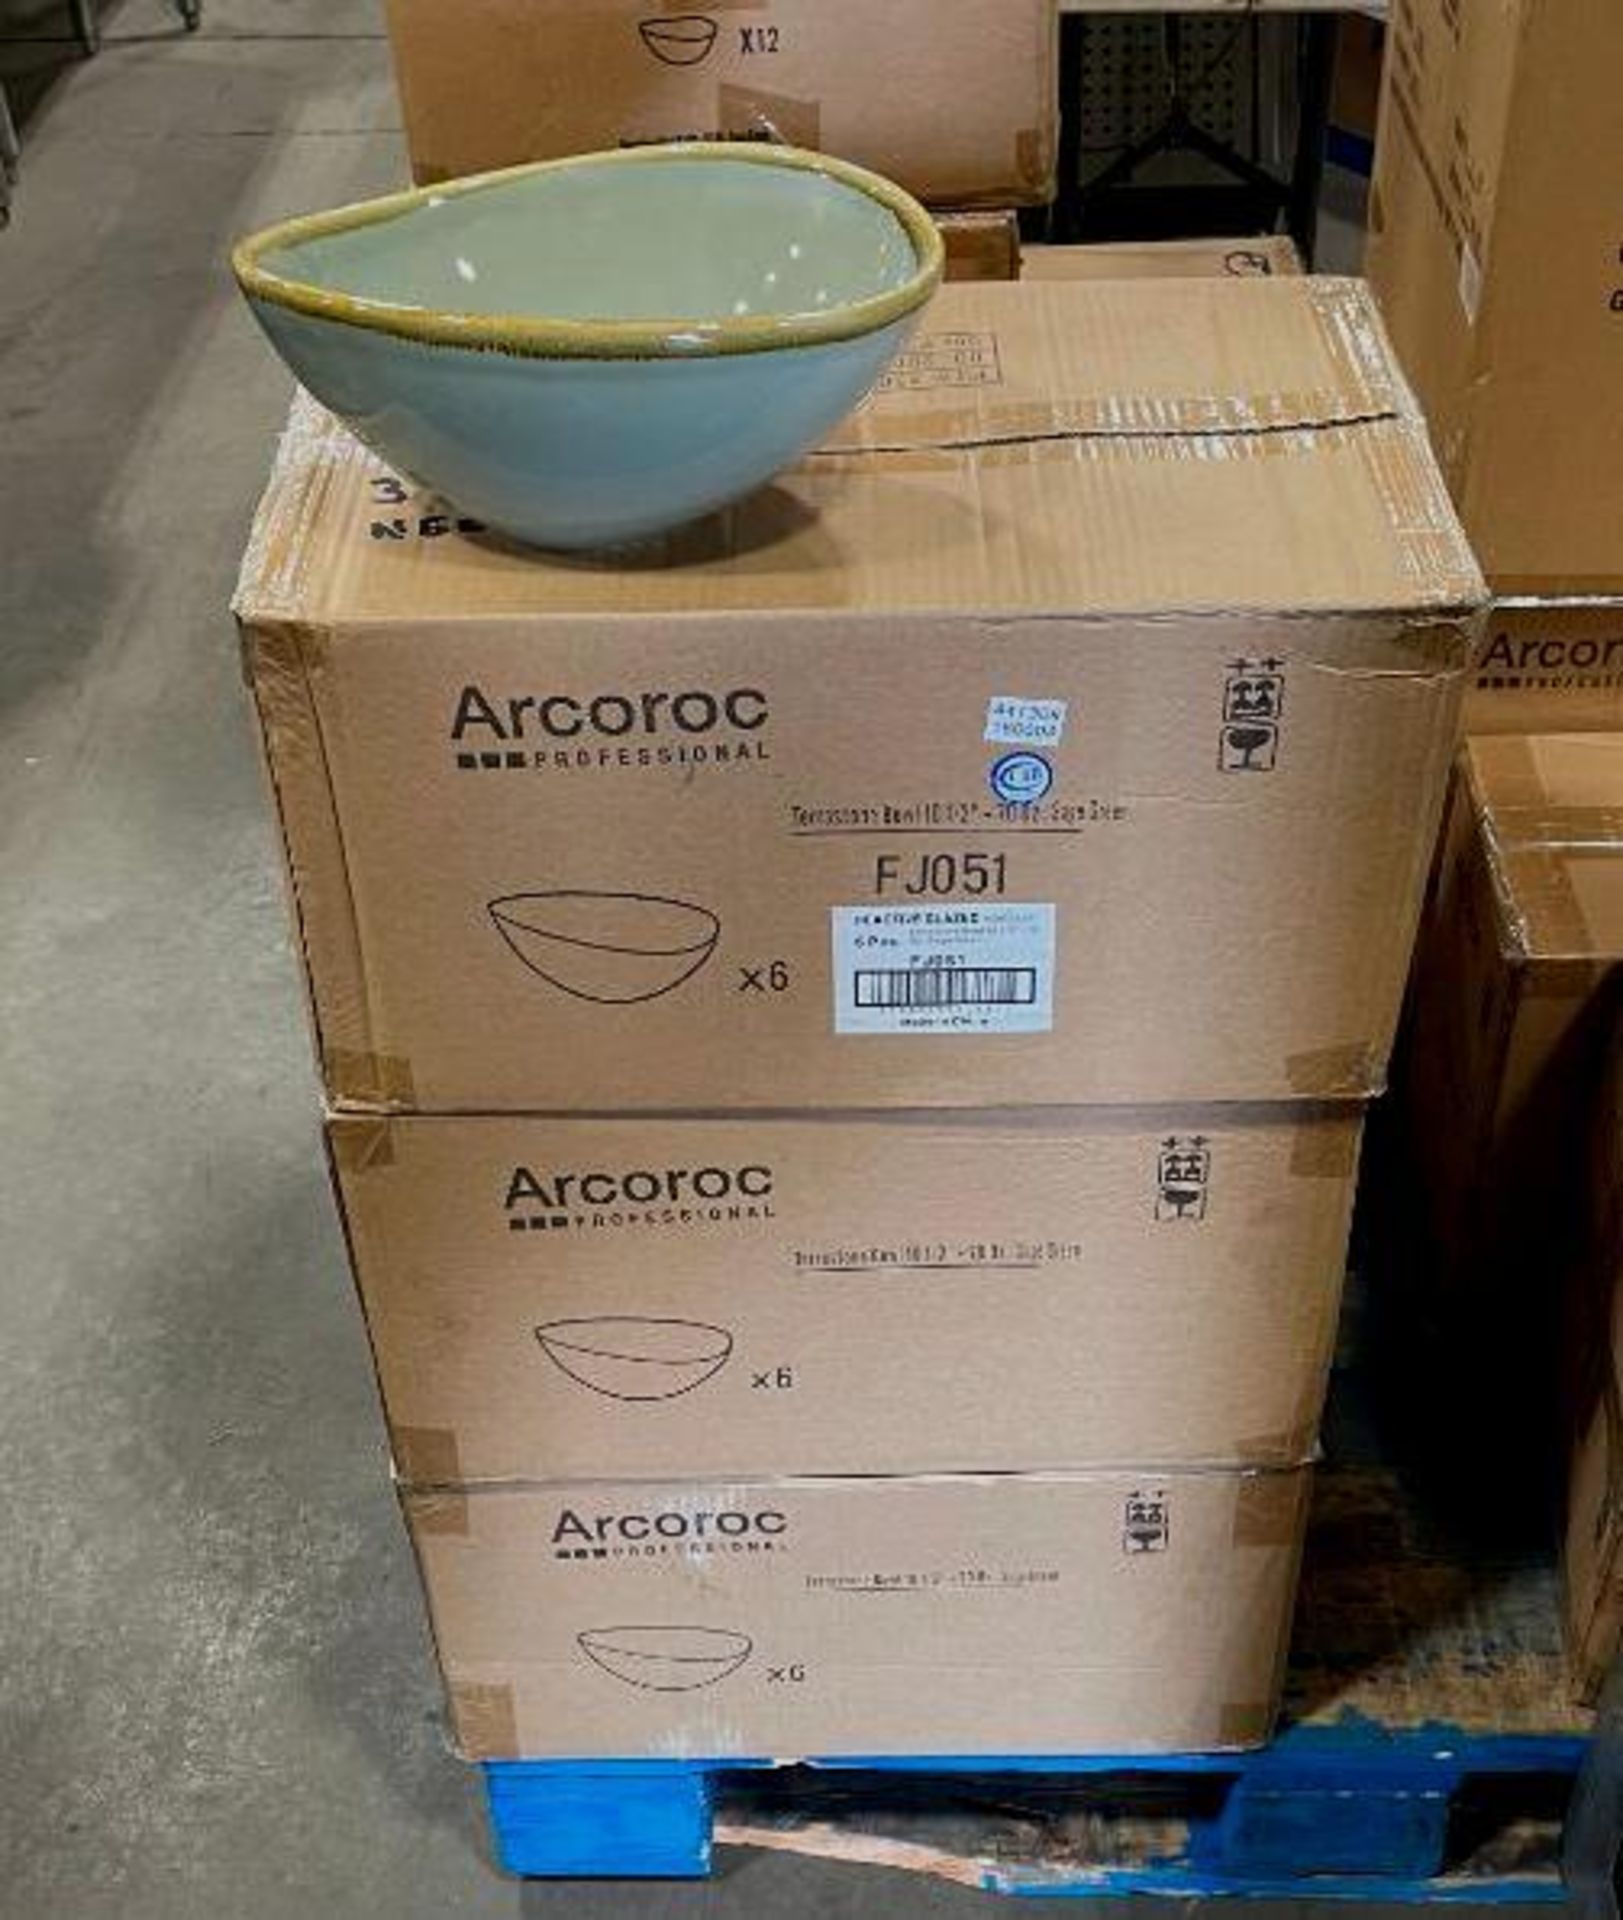 3 CASES OF TERRASTONE 10 1/2" SAGE GREEN BOWL - 6/CASE, ARCOROC - NEW - Image 3 of 3